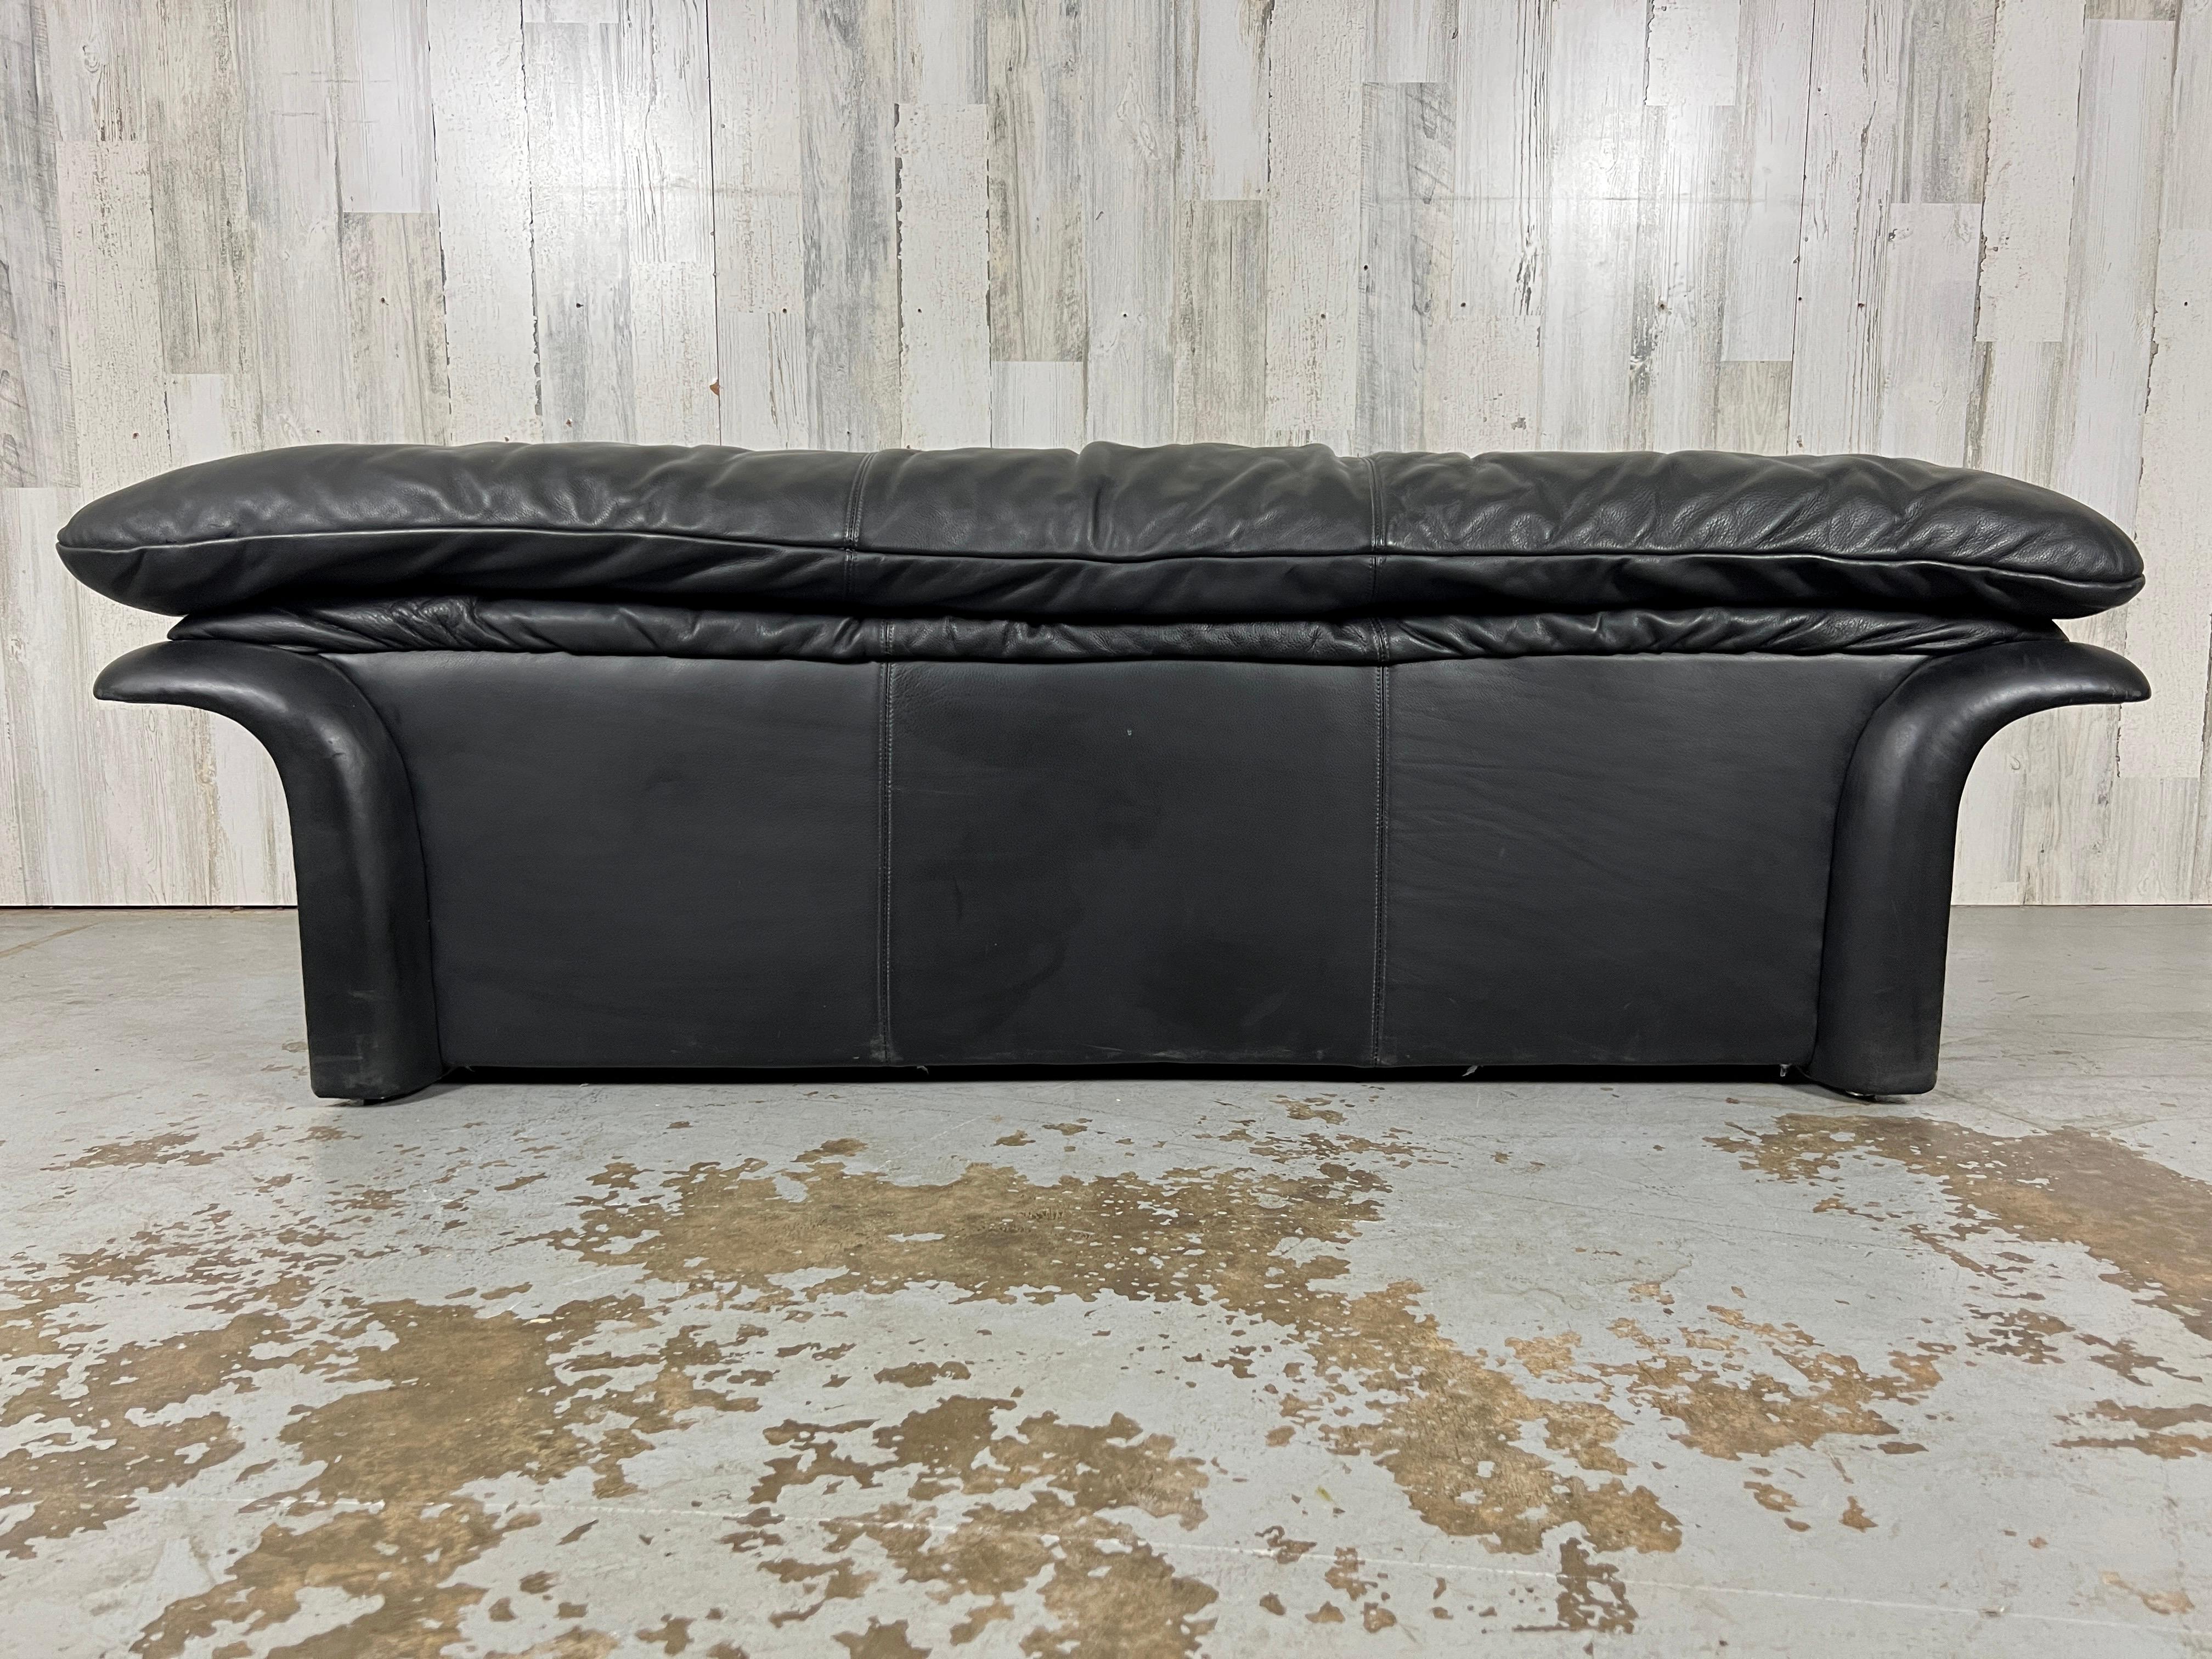 Post Modern Leather Bench In Good Condition For Sale In Denton, TX